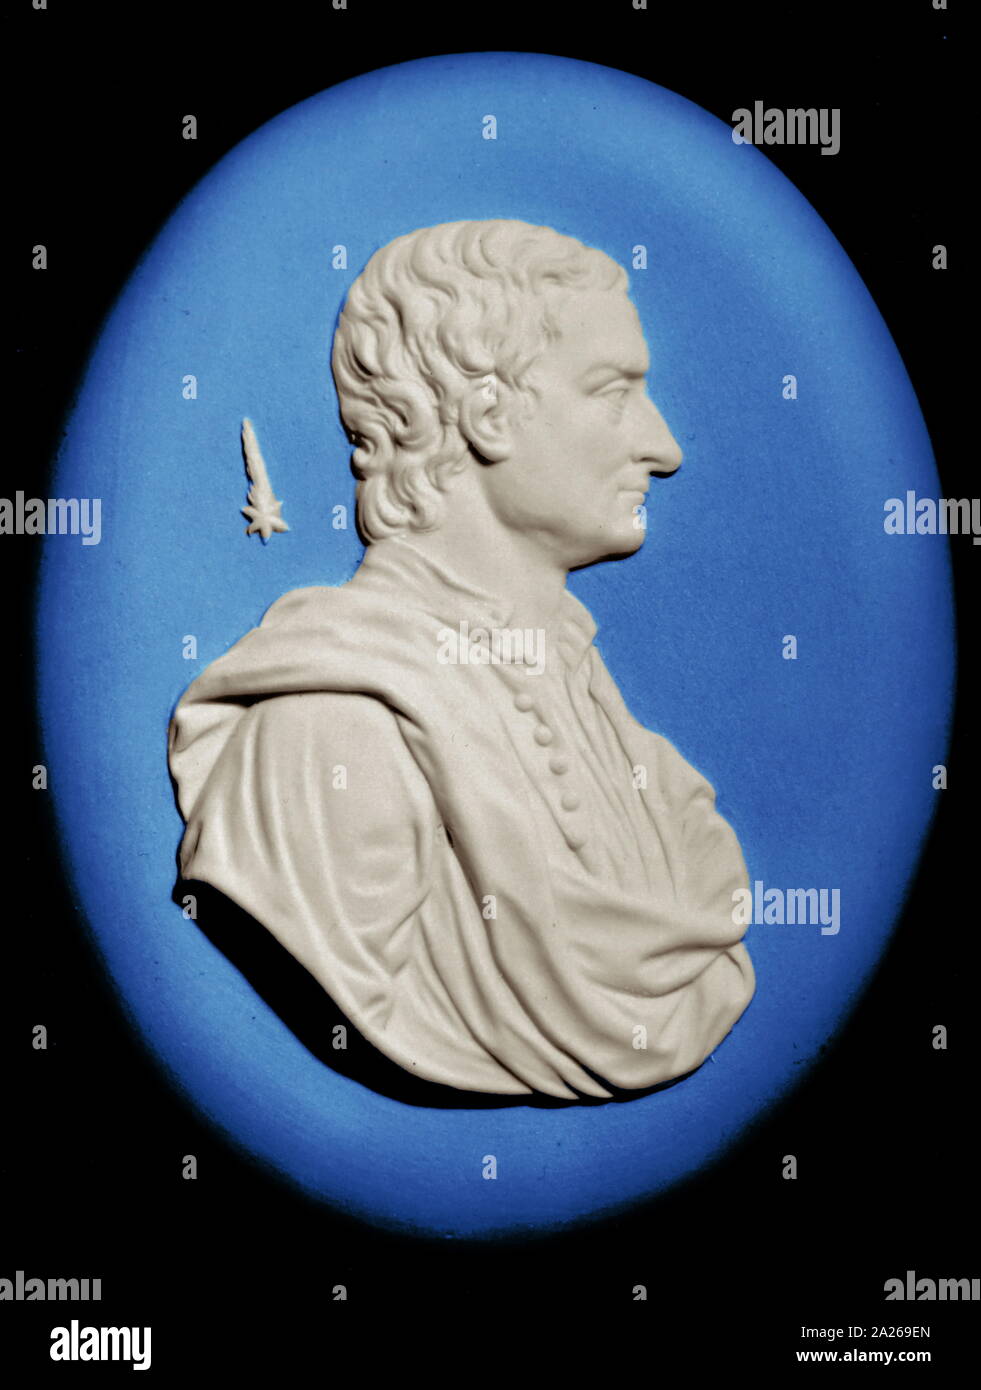 Wedgwood medallion of Isaac NEWTON (1642-1727) on blue Jaspar Ware -attributed to Hackwood. HALLEY'S COMET is in the background. Its appearance in 1682 created great interest. Halley considered it to be a periodic comet and, using Newton's theory of universal gravitation, calculated its return in Its reappearance as predicted confirmed Newton's laws. Stock Photo